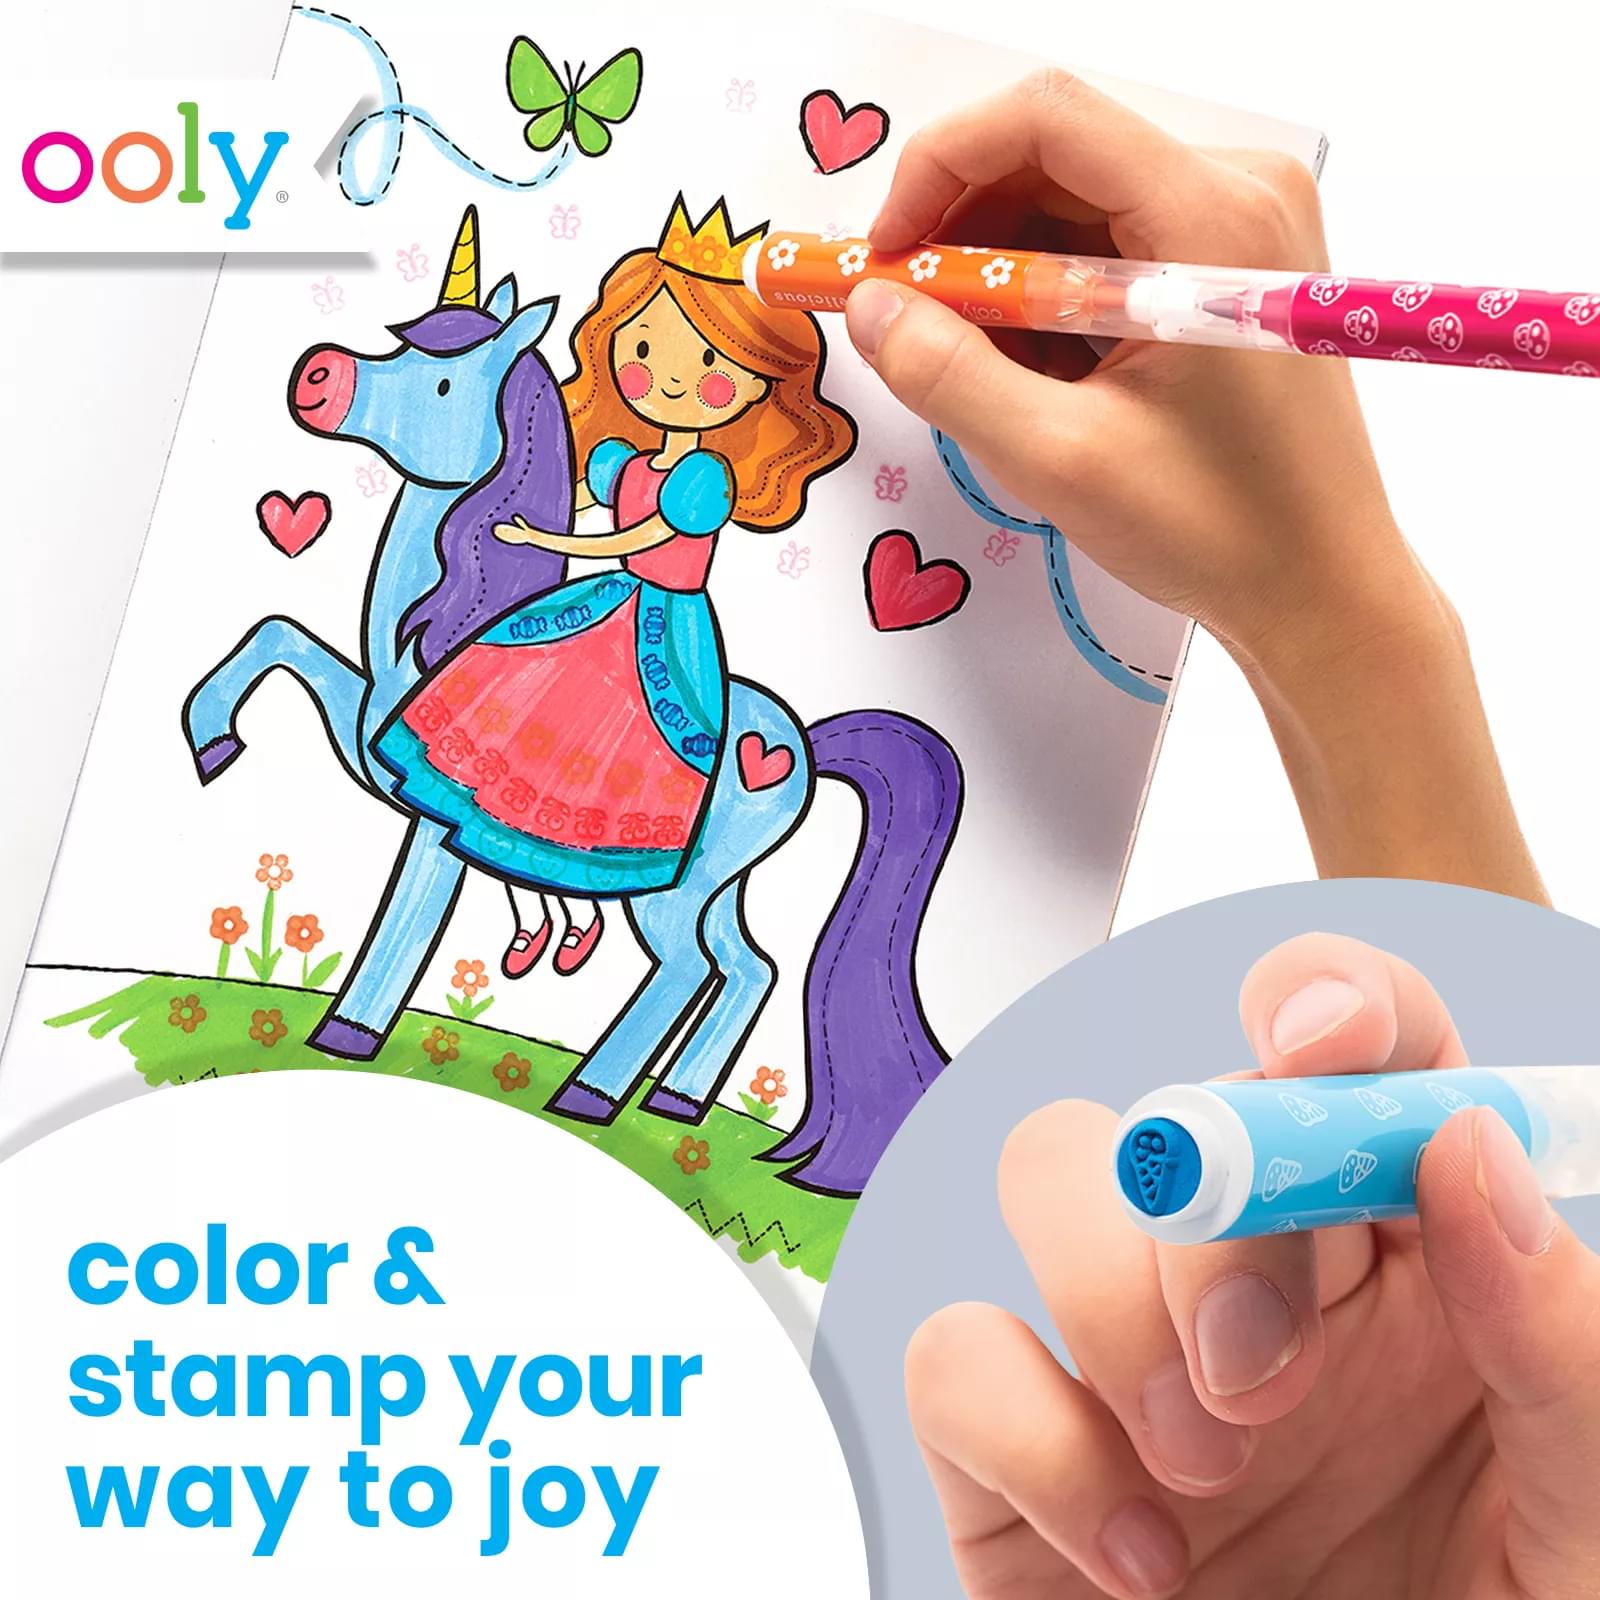 OOLY stamp markers stamp-a-doodle 12 pcs 3 yrs+ – PSiloveyou